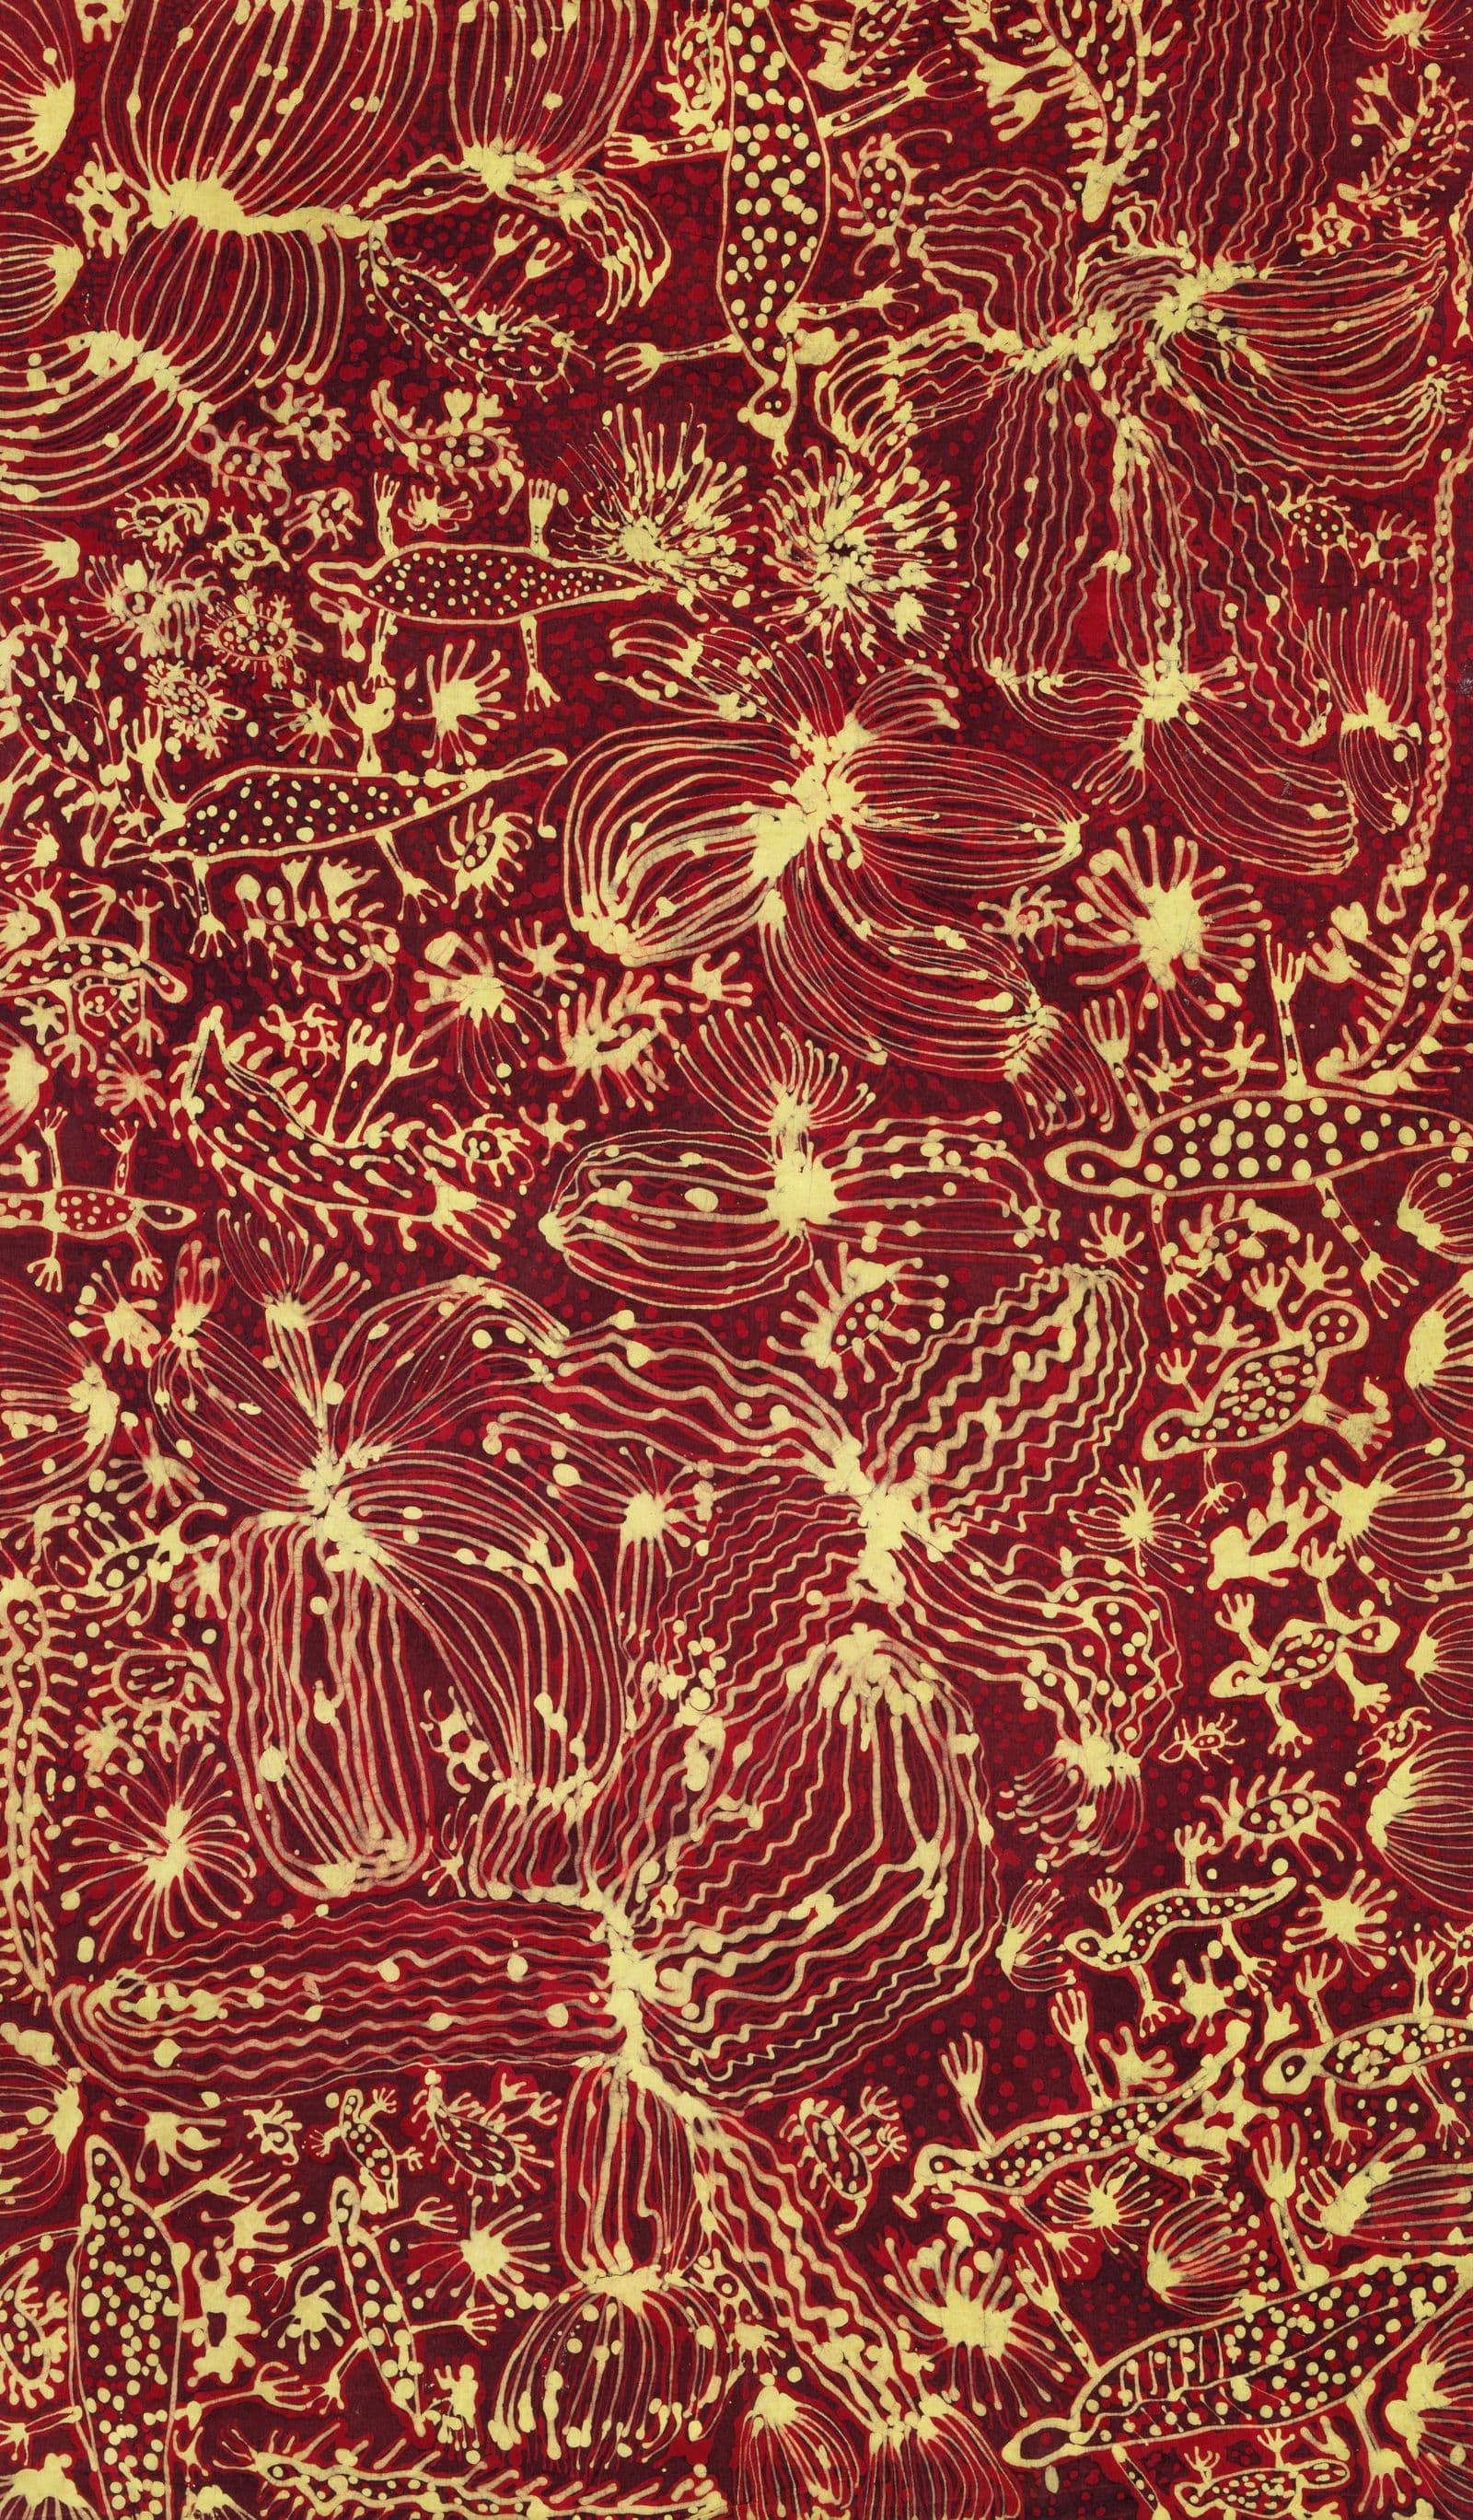 A batik painting in reds and yellows with lines and dots.